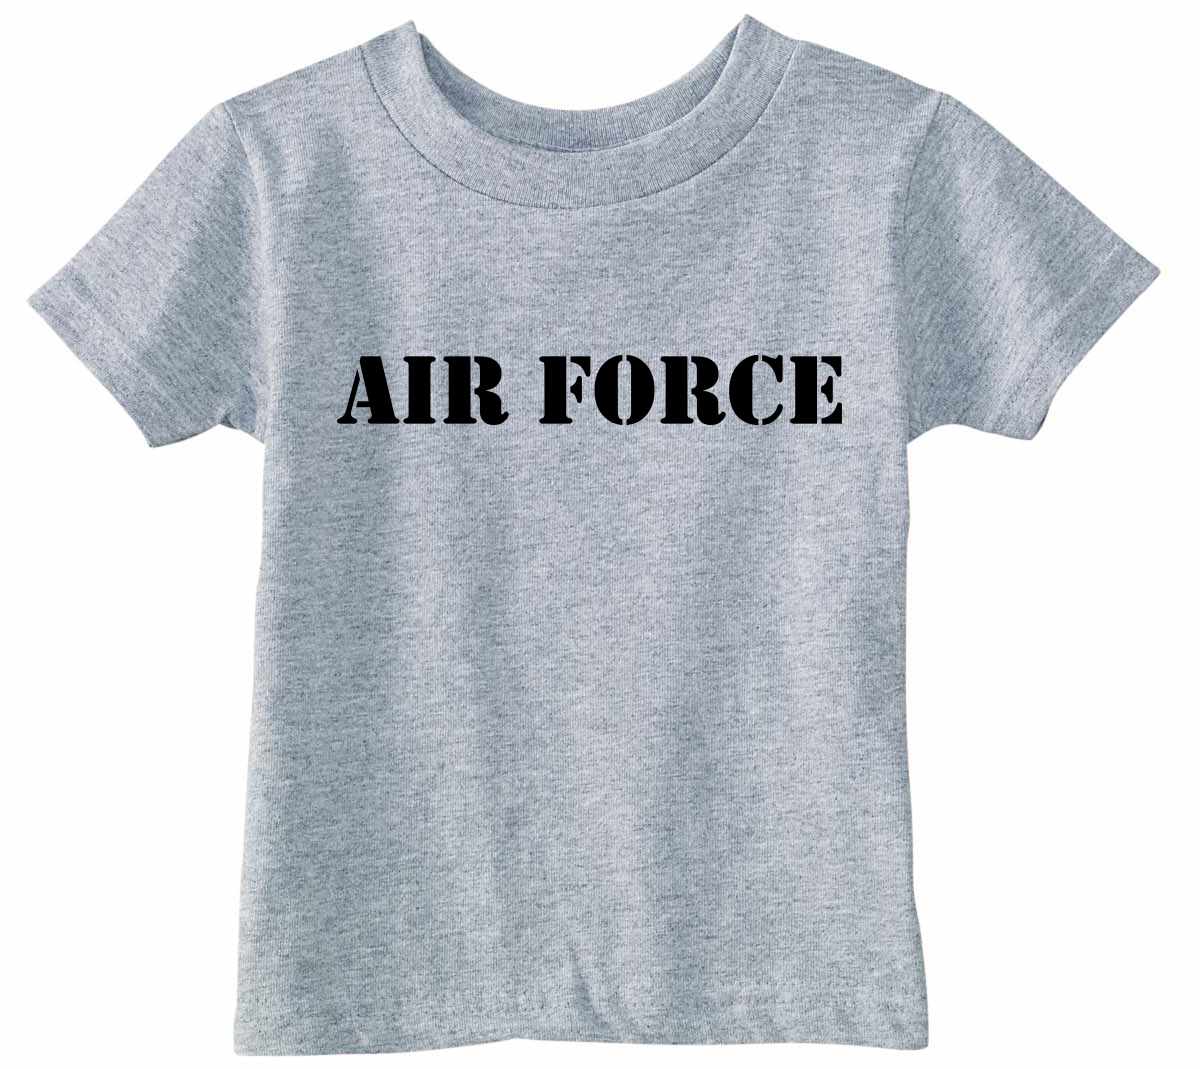 AIR FORCE Infant/Toddler  (#339-7)